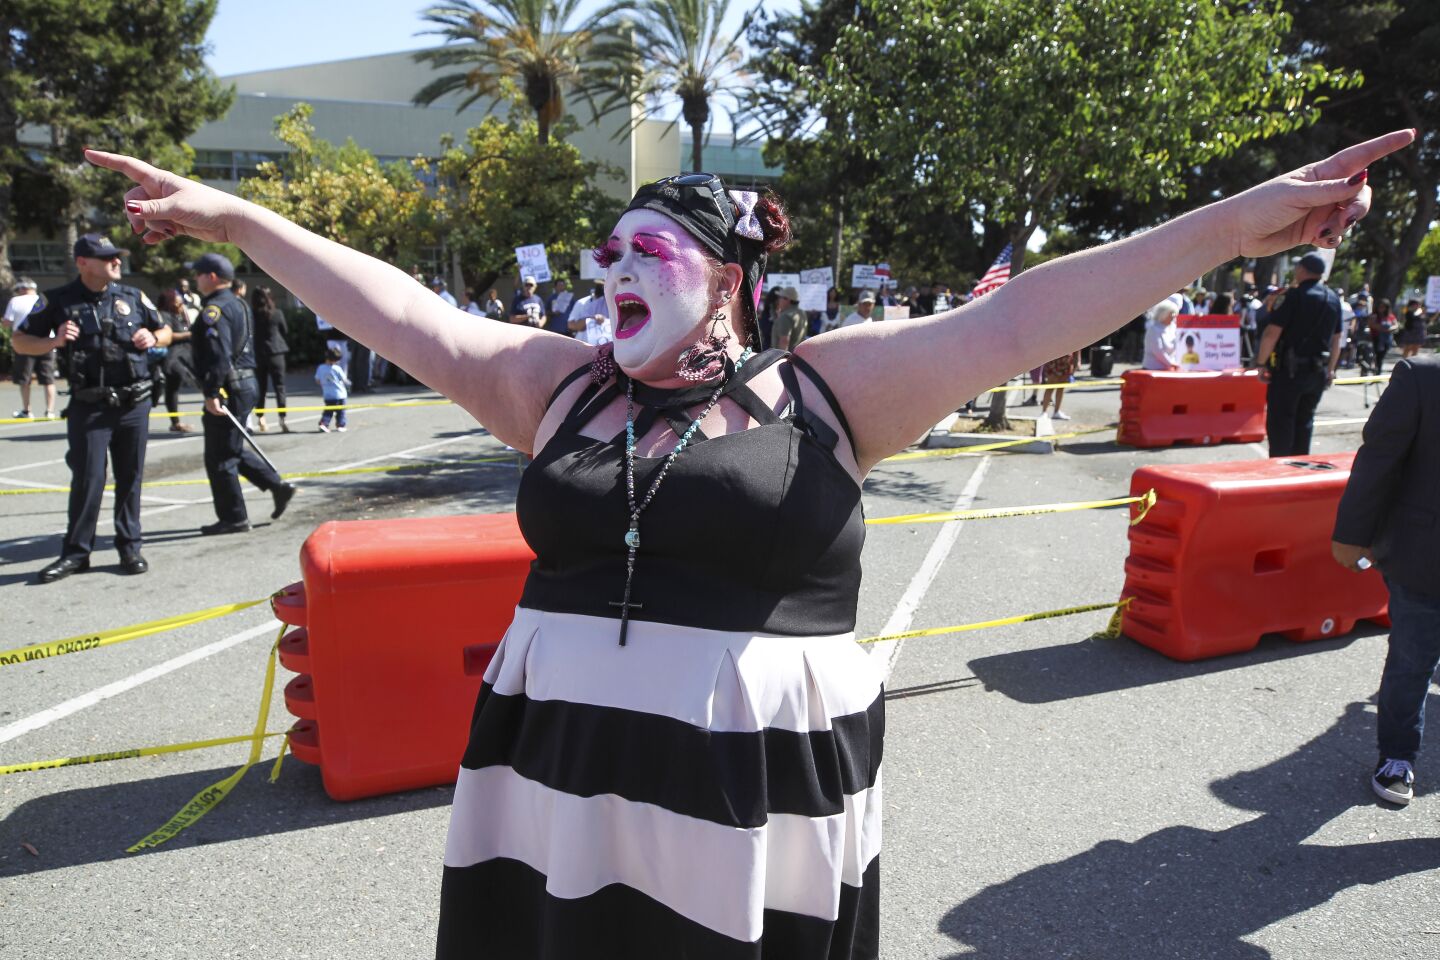 Sister April Hamm Linkin, with the San Diego Sisters of Perpetual Indulgence, leads other supporters of the Drag Queen Story Hour in a chant at the Chula Vista Public Library, Civic Center Branch, on Tuesday, September 10, 2019 in Chula Vista, California.